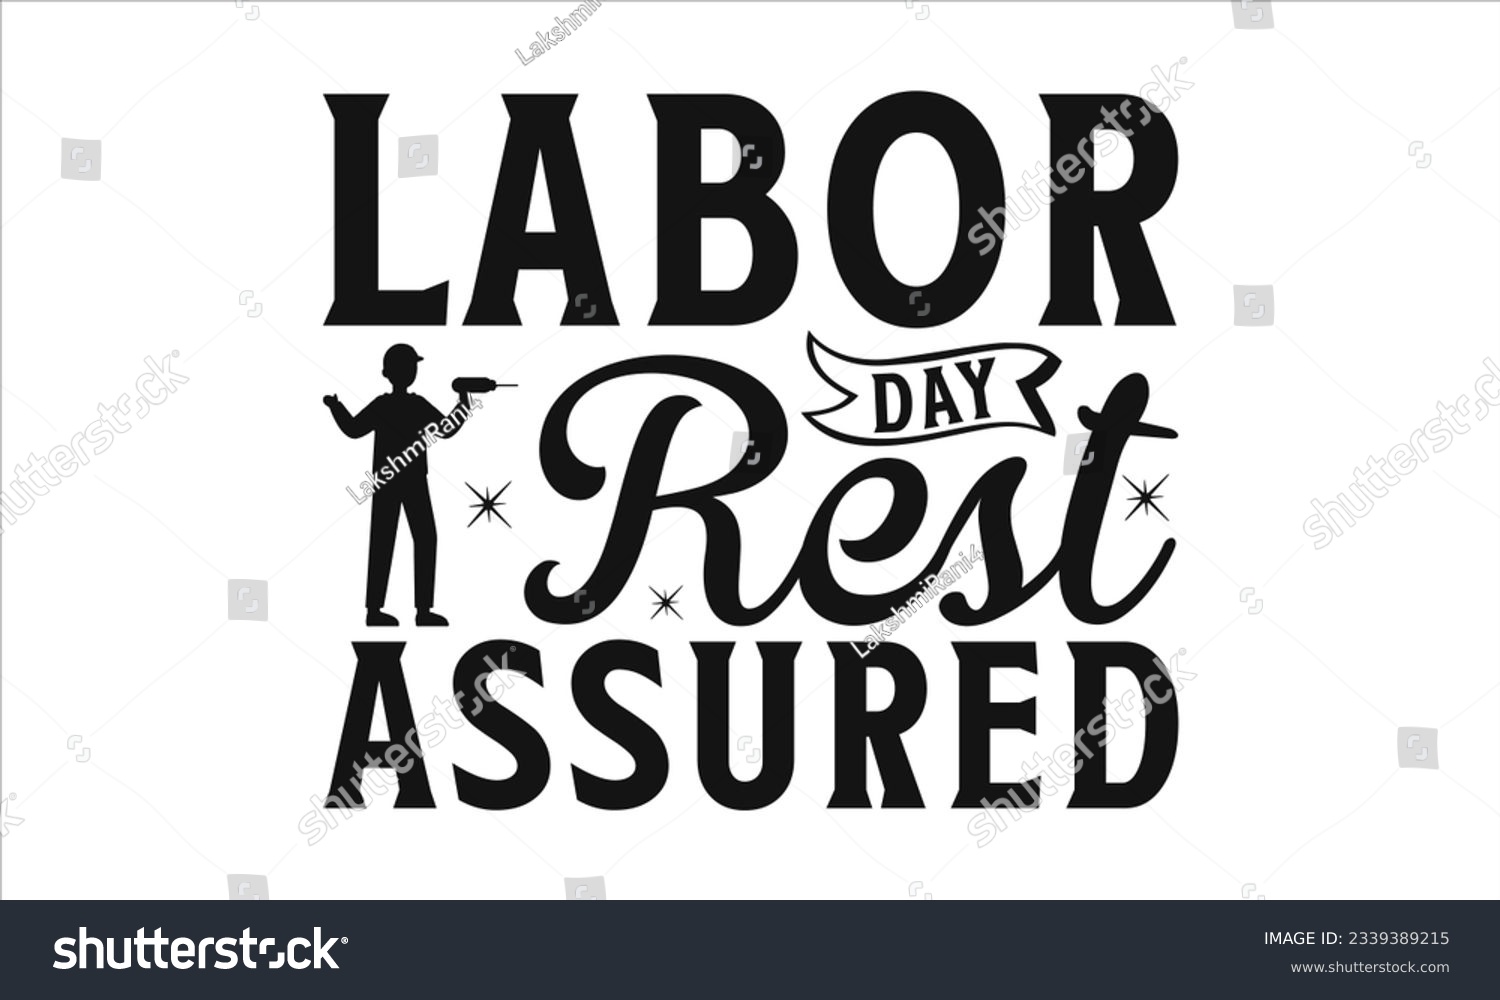 SVG of  Labor Day Rest Assured -  Lettering design for greeting banners, Mouse Pads, Prints, Cards and Posters, Mugs, Notebooks, Floor Pillows and T-shirt prints design svg